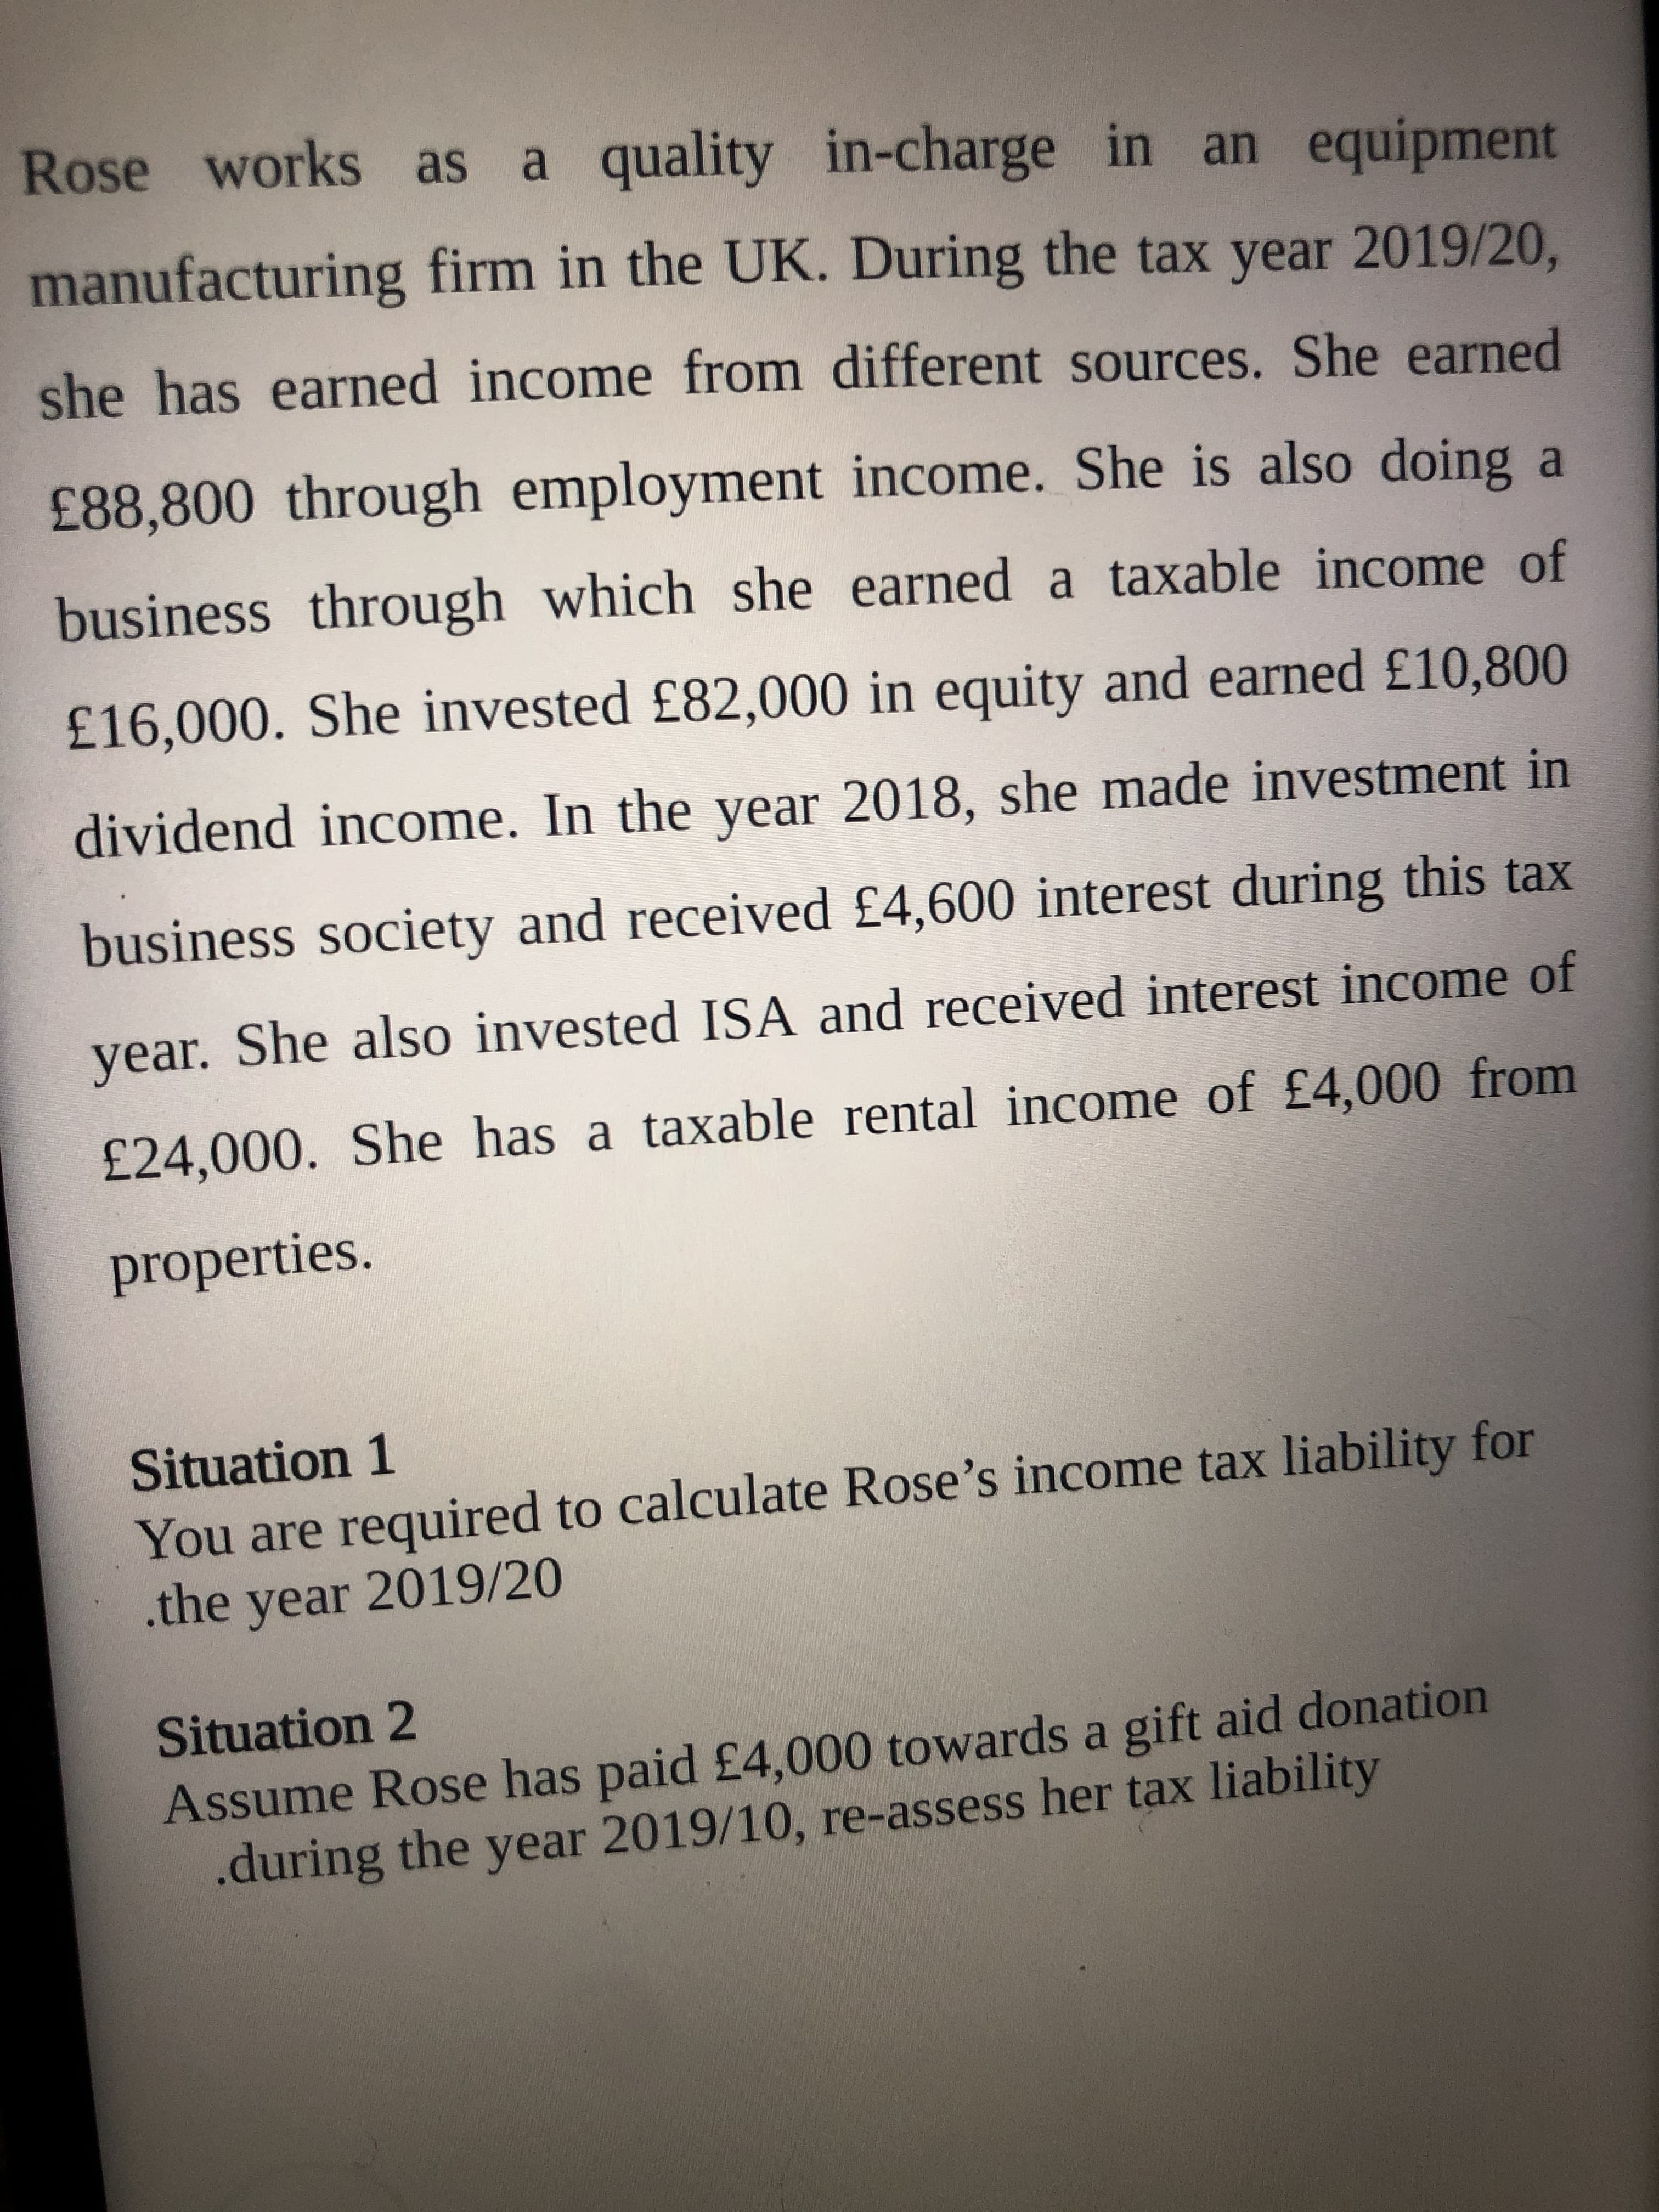 Situation 1
You are required to calculate Rose's income tax liability for
.the year 2019/20
Situation 2
Assume Rose has paid £4,000 towards a gift aid donation
.during the year 2019/10, re-assess her tax liability
